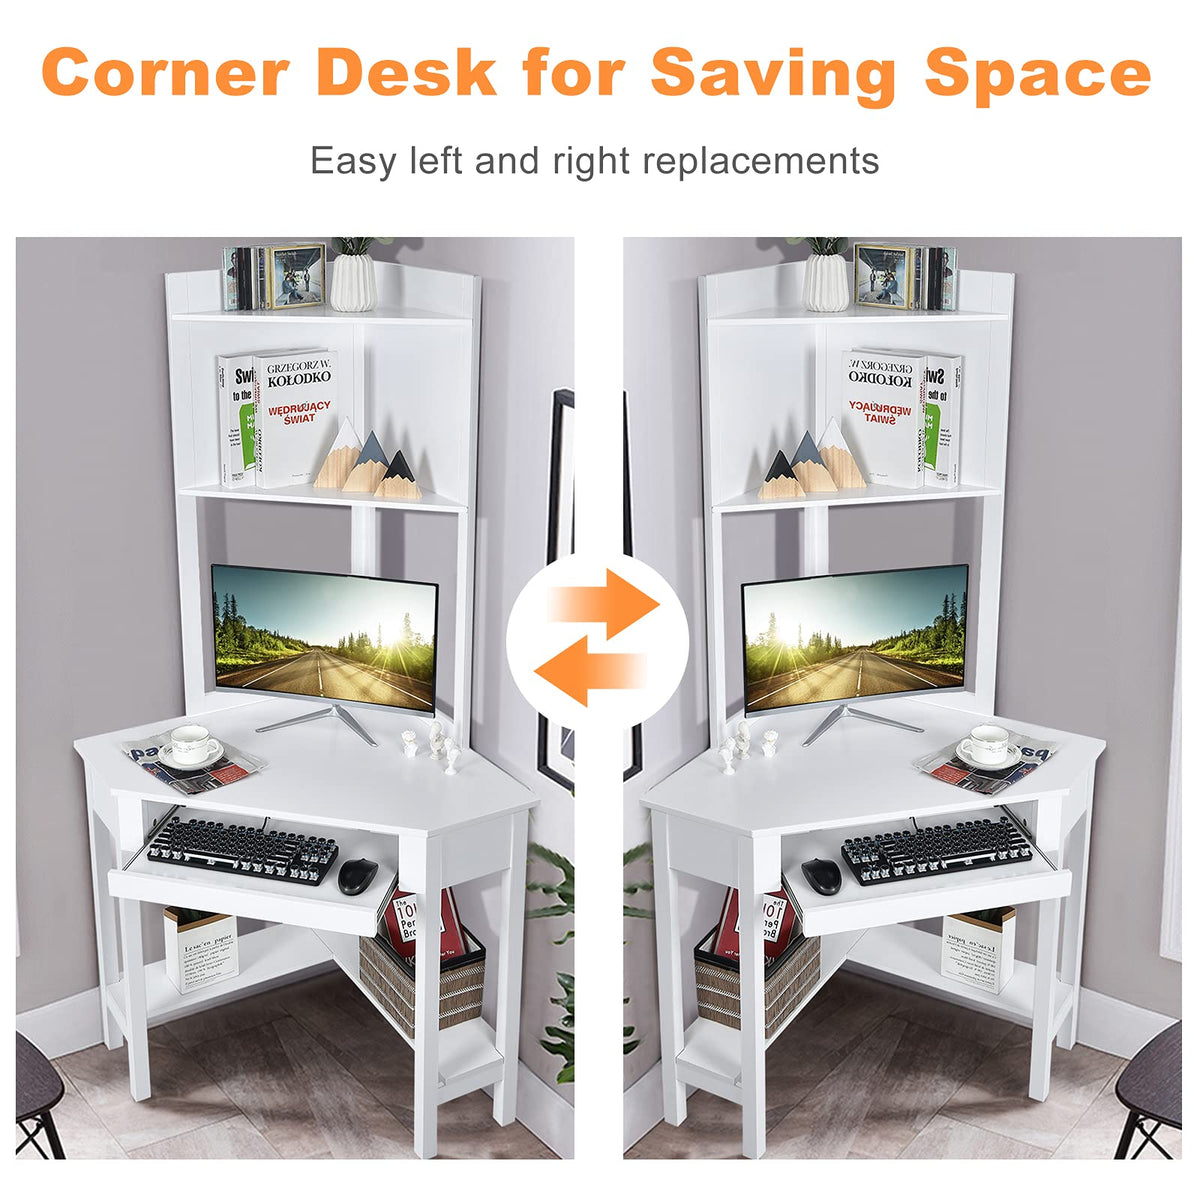 Giantex Corner Desk with Hutch, Compact Home Office Desk, Corner Computer Desk, Study and Writing Table